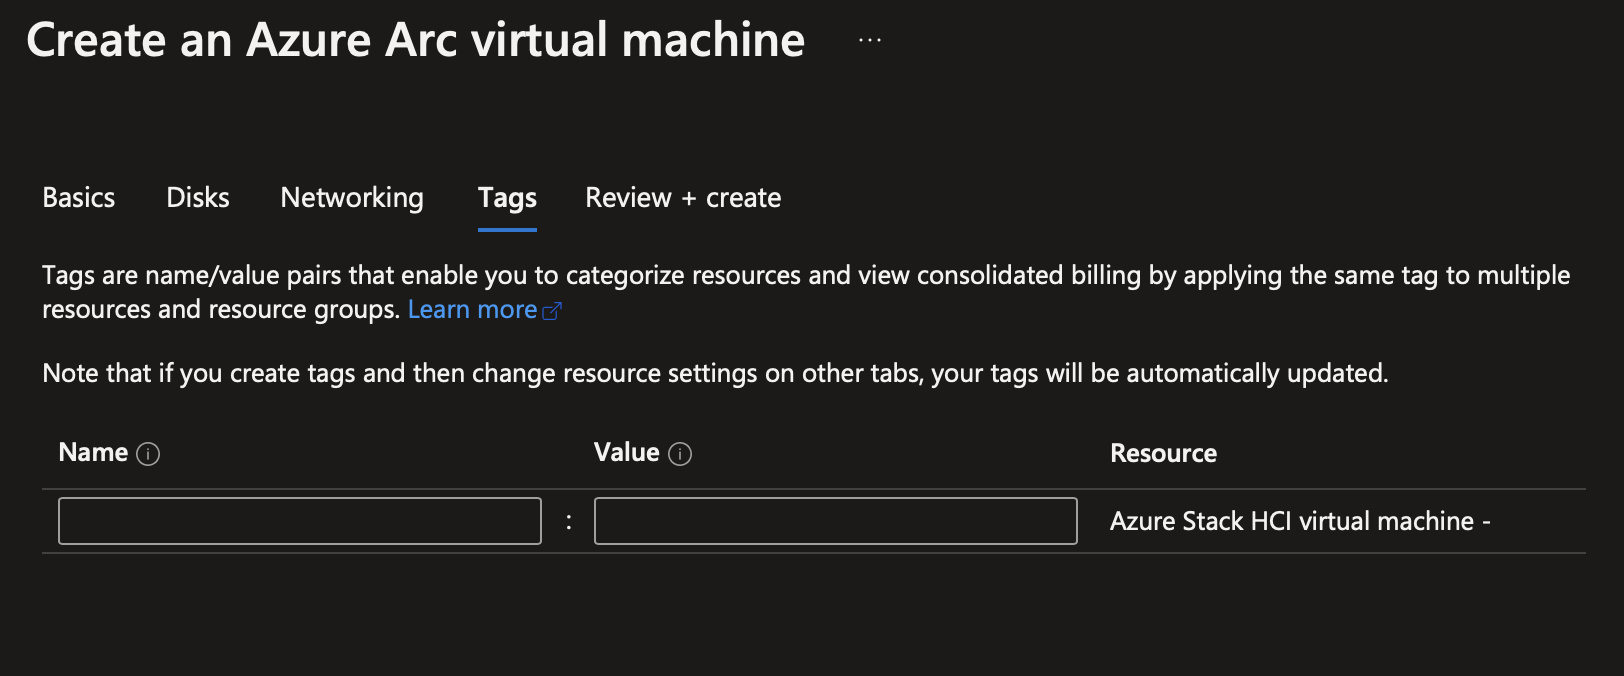 Like all Azure resources, you can apply tags